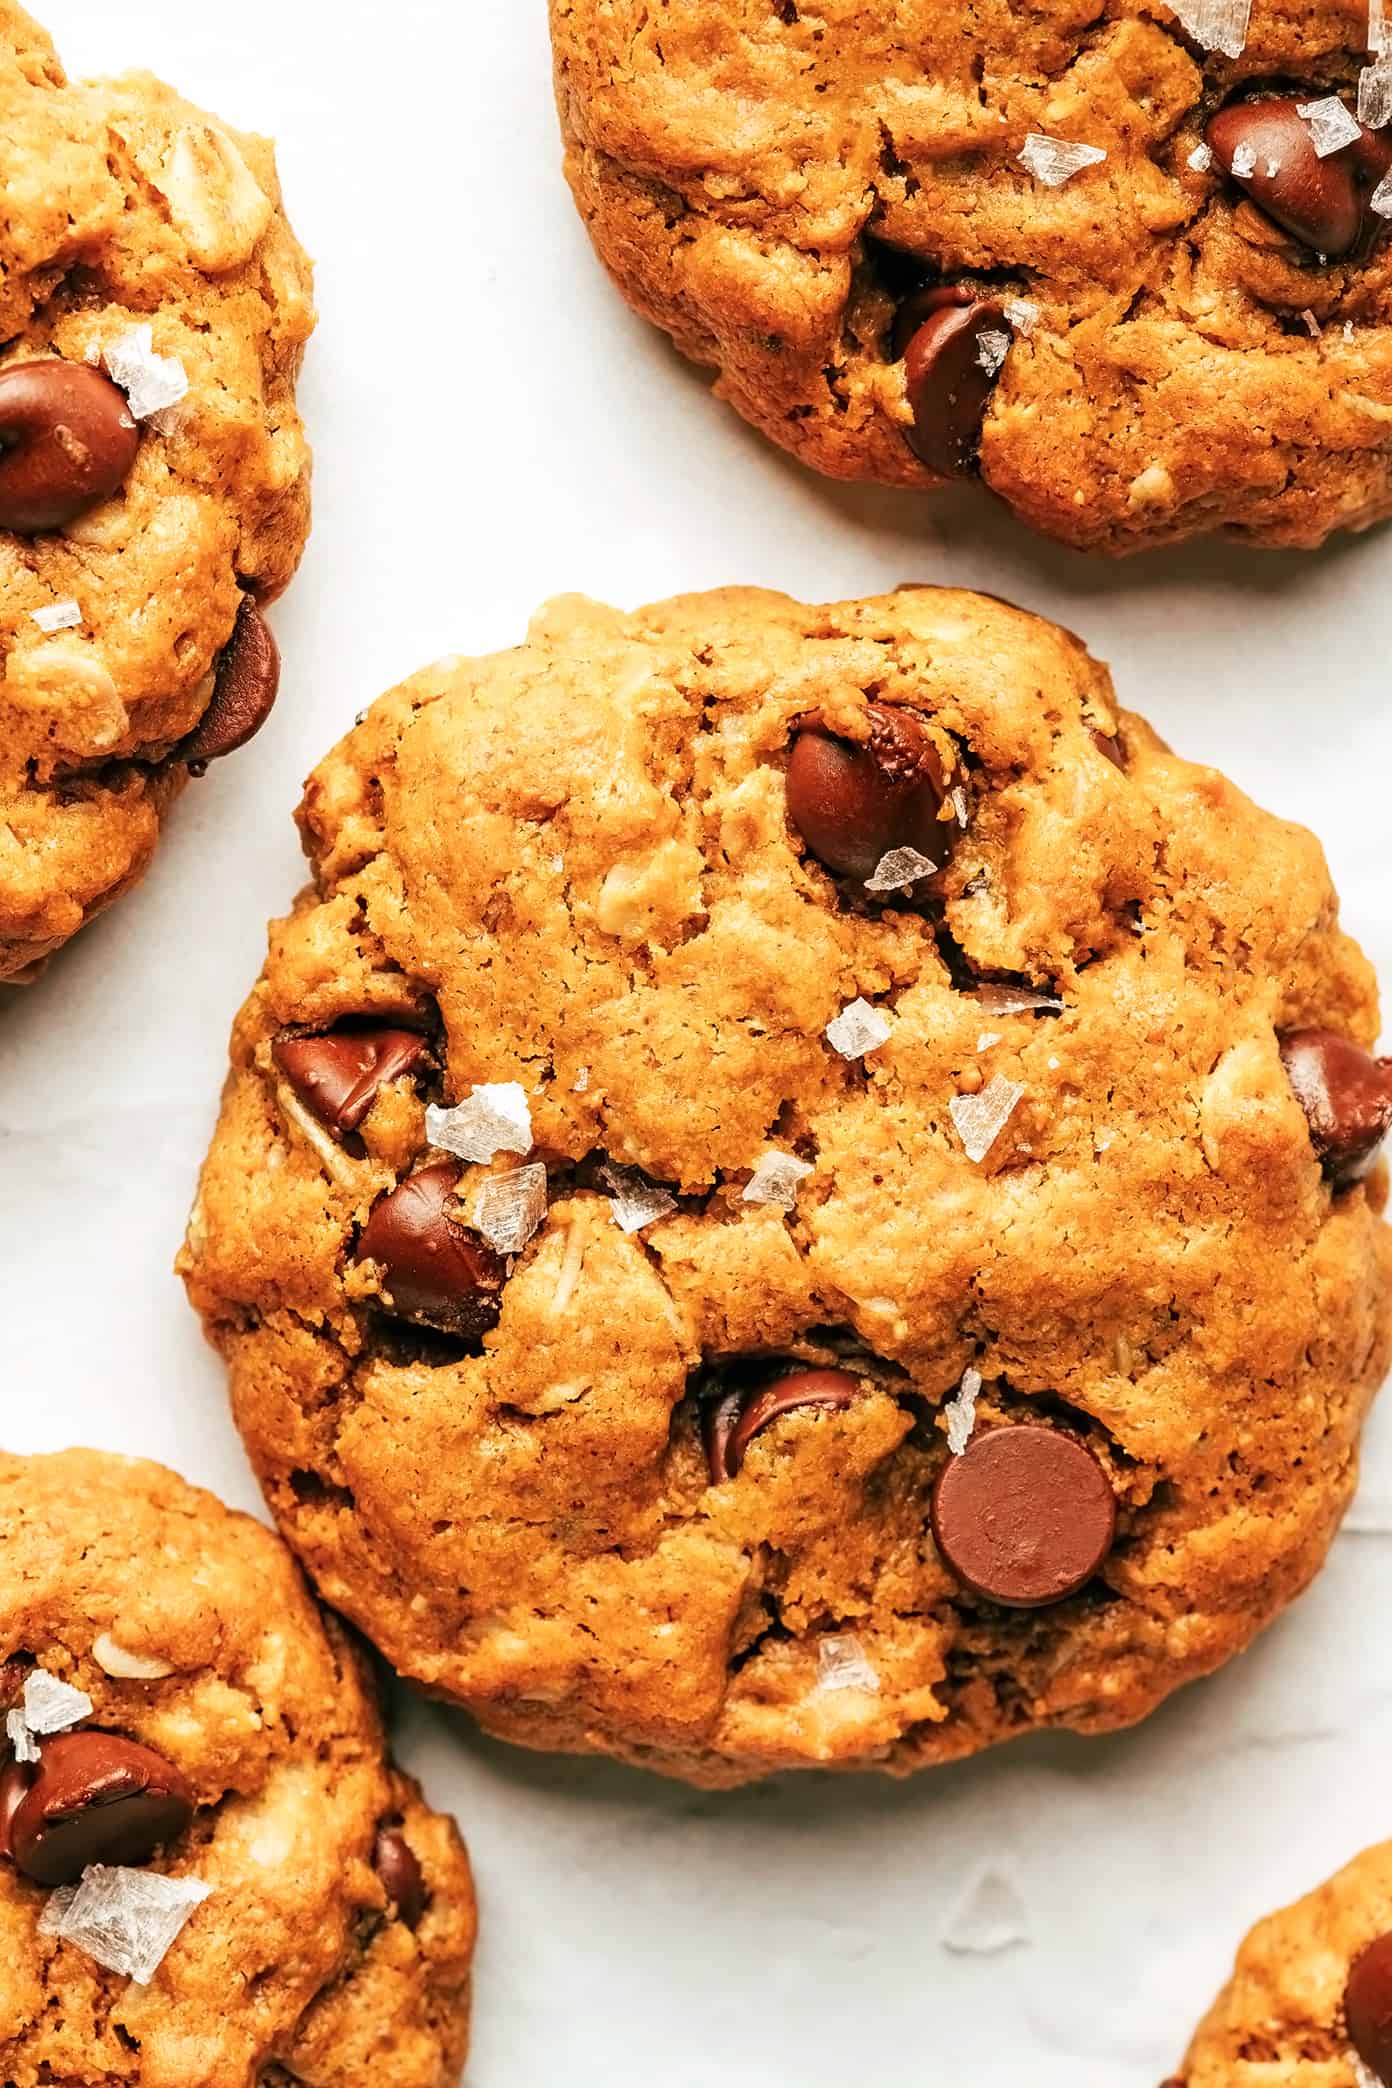 Healthy Peanut Butter Cookies with Chocolate Chips and Sea Salt Closeup